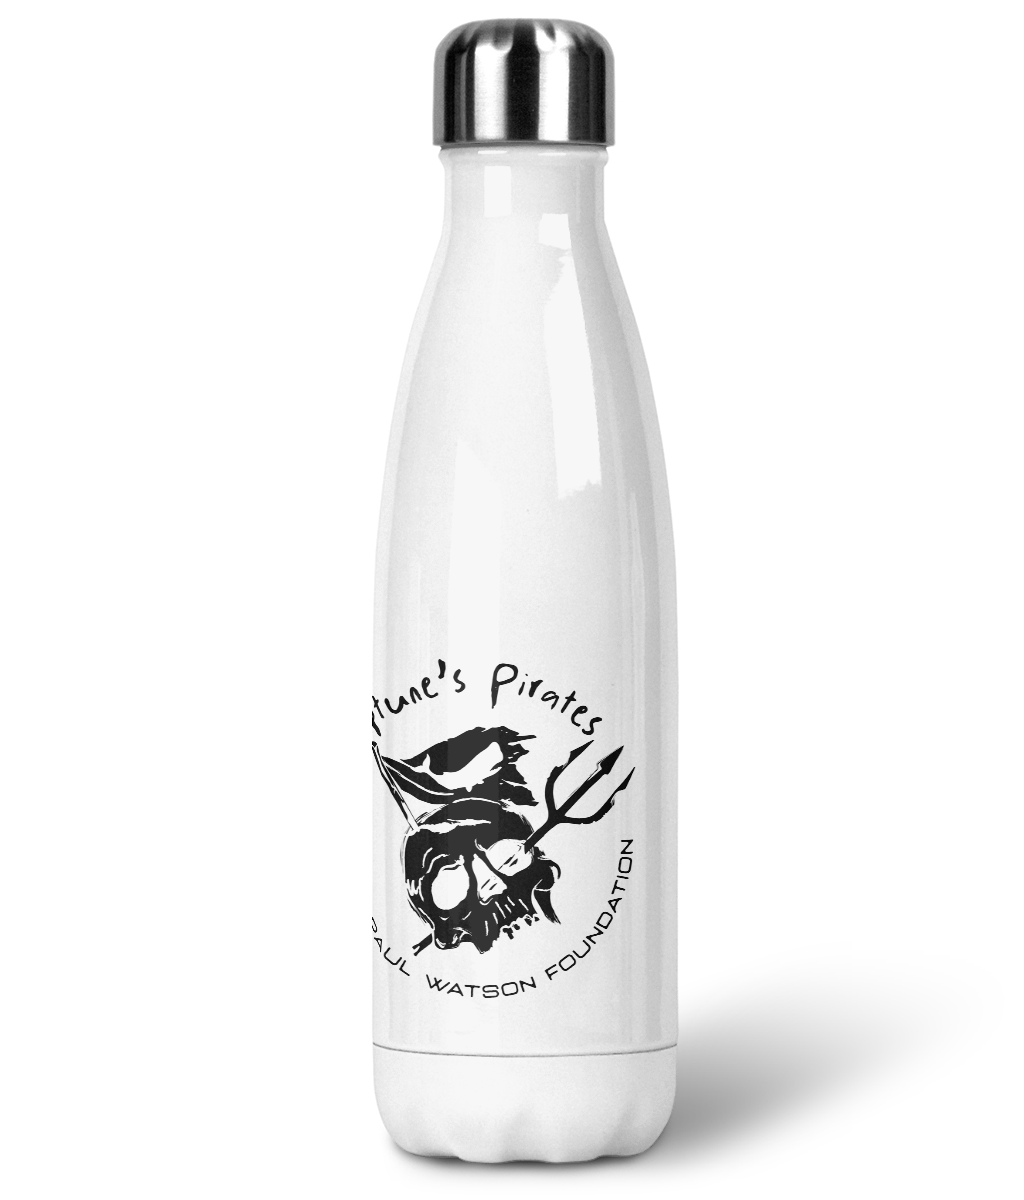 Neptune's Pirates Stainless Steel 500ml Bottle - Captain Paul Watson Foundation (t/a Neptune's Pirates)